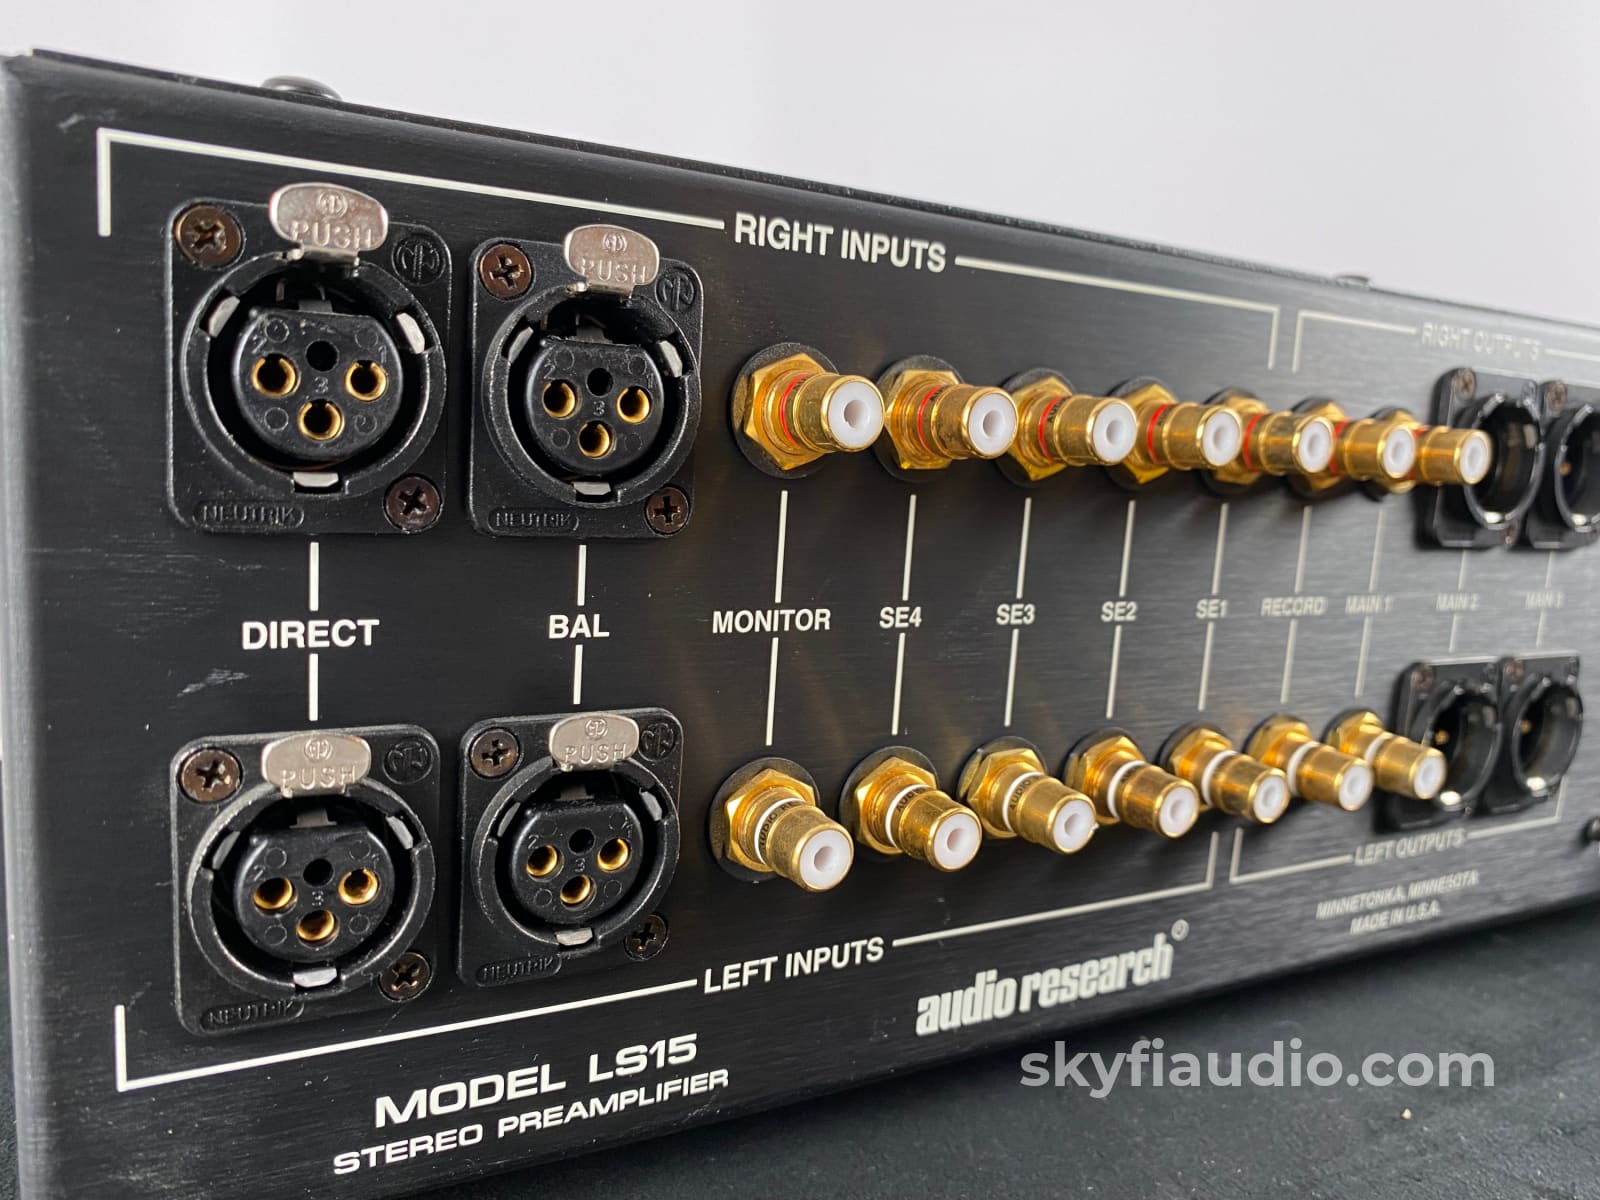 Audio Research Ls15 Tube Preamplifier - Complete Package Set